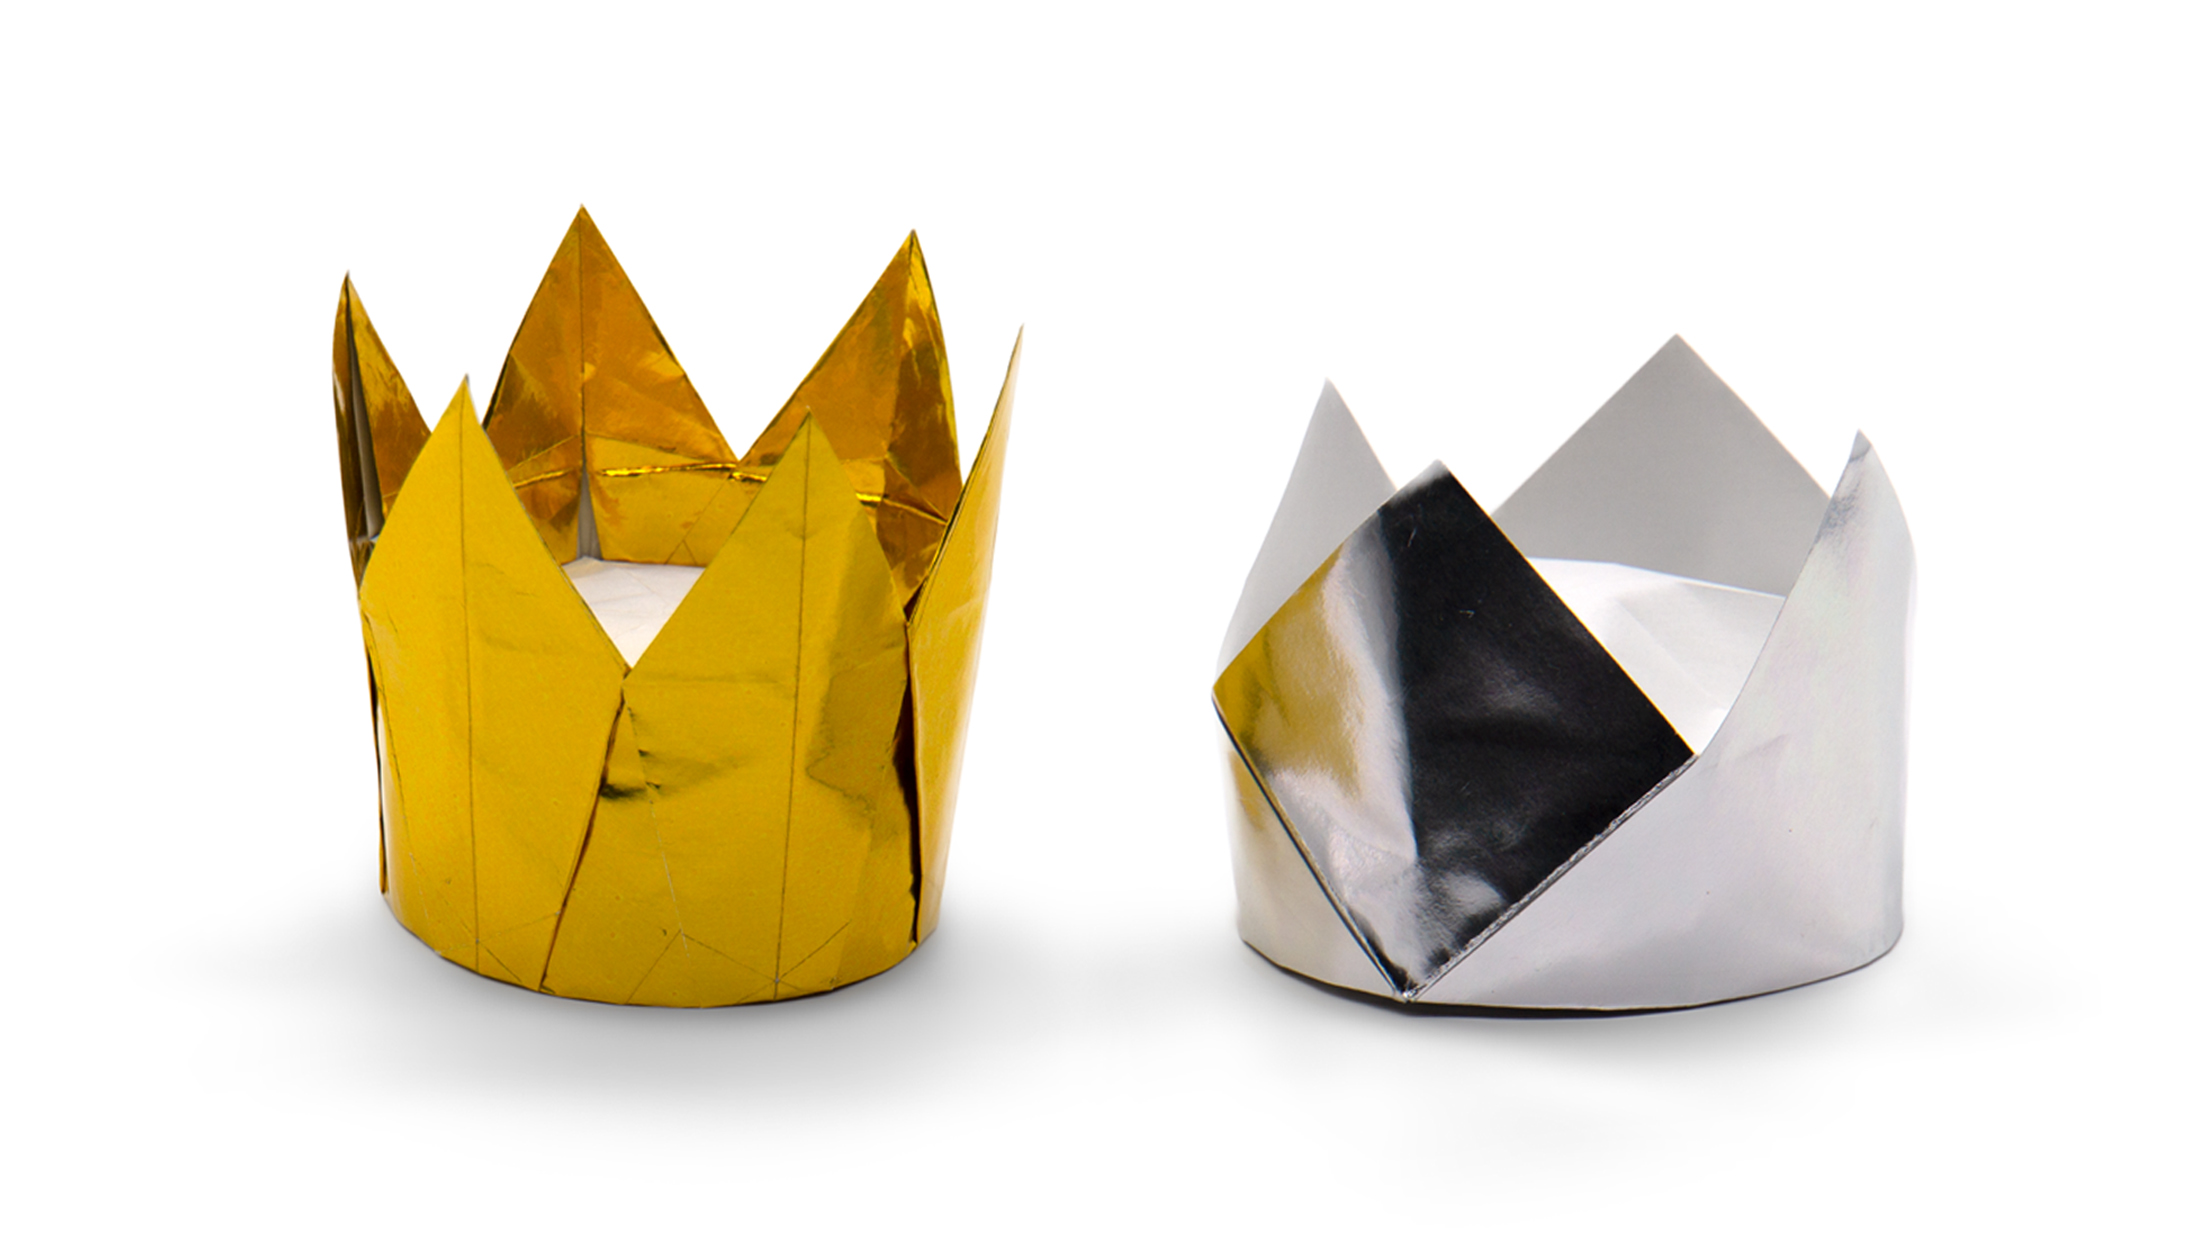 Origami Crowns- Easy Paper Craft For Kids